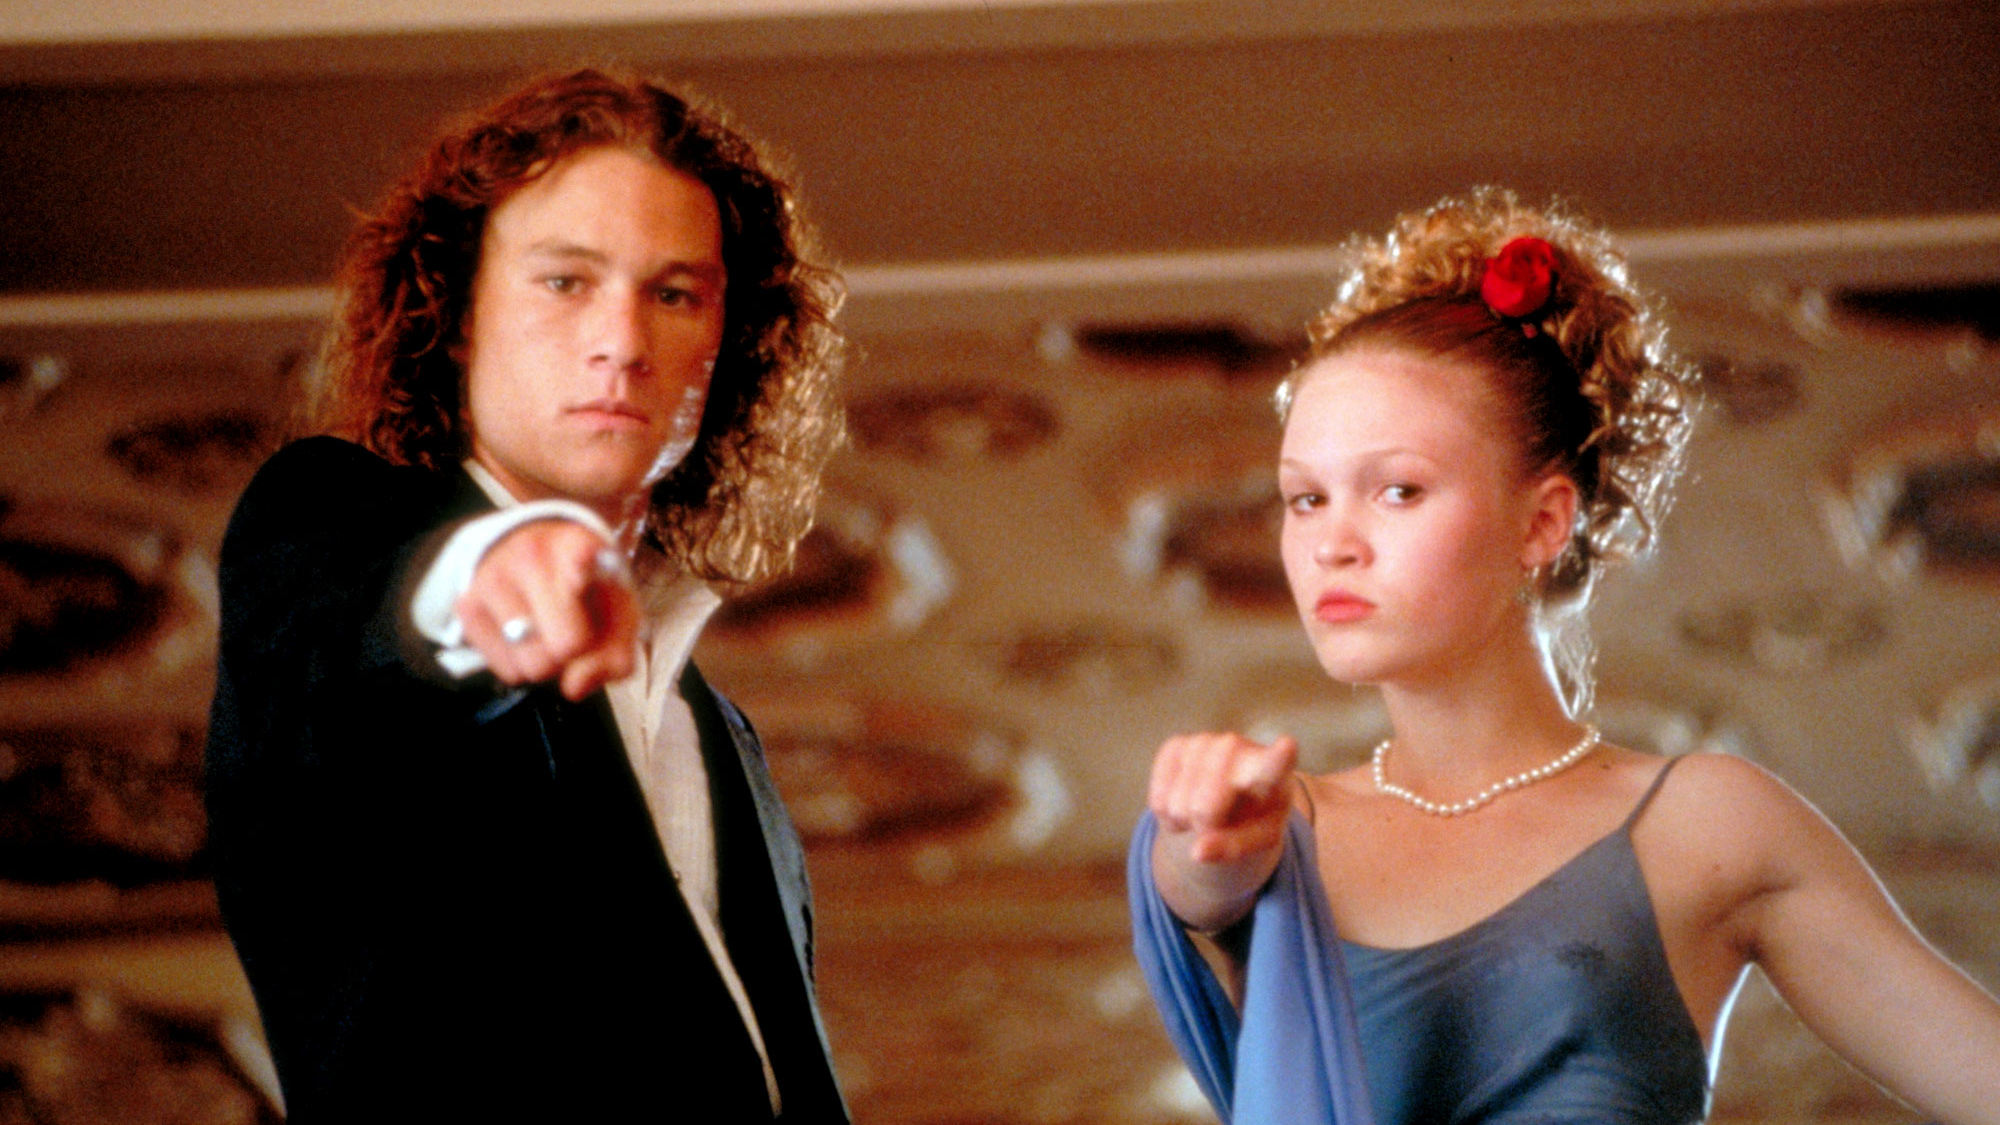 Heath Ledger and Julia Stiles on 10 Things I Hate About You